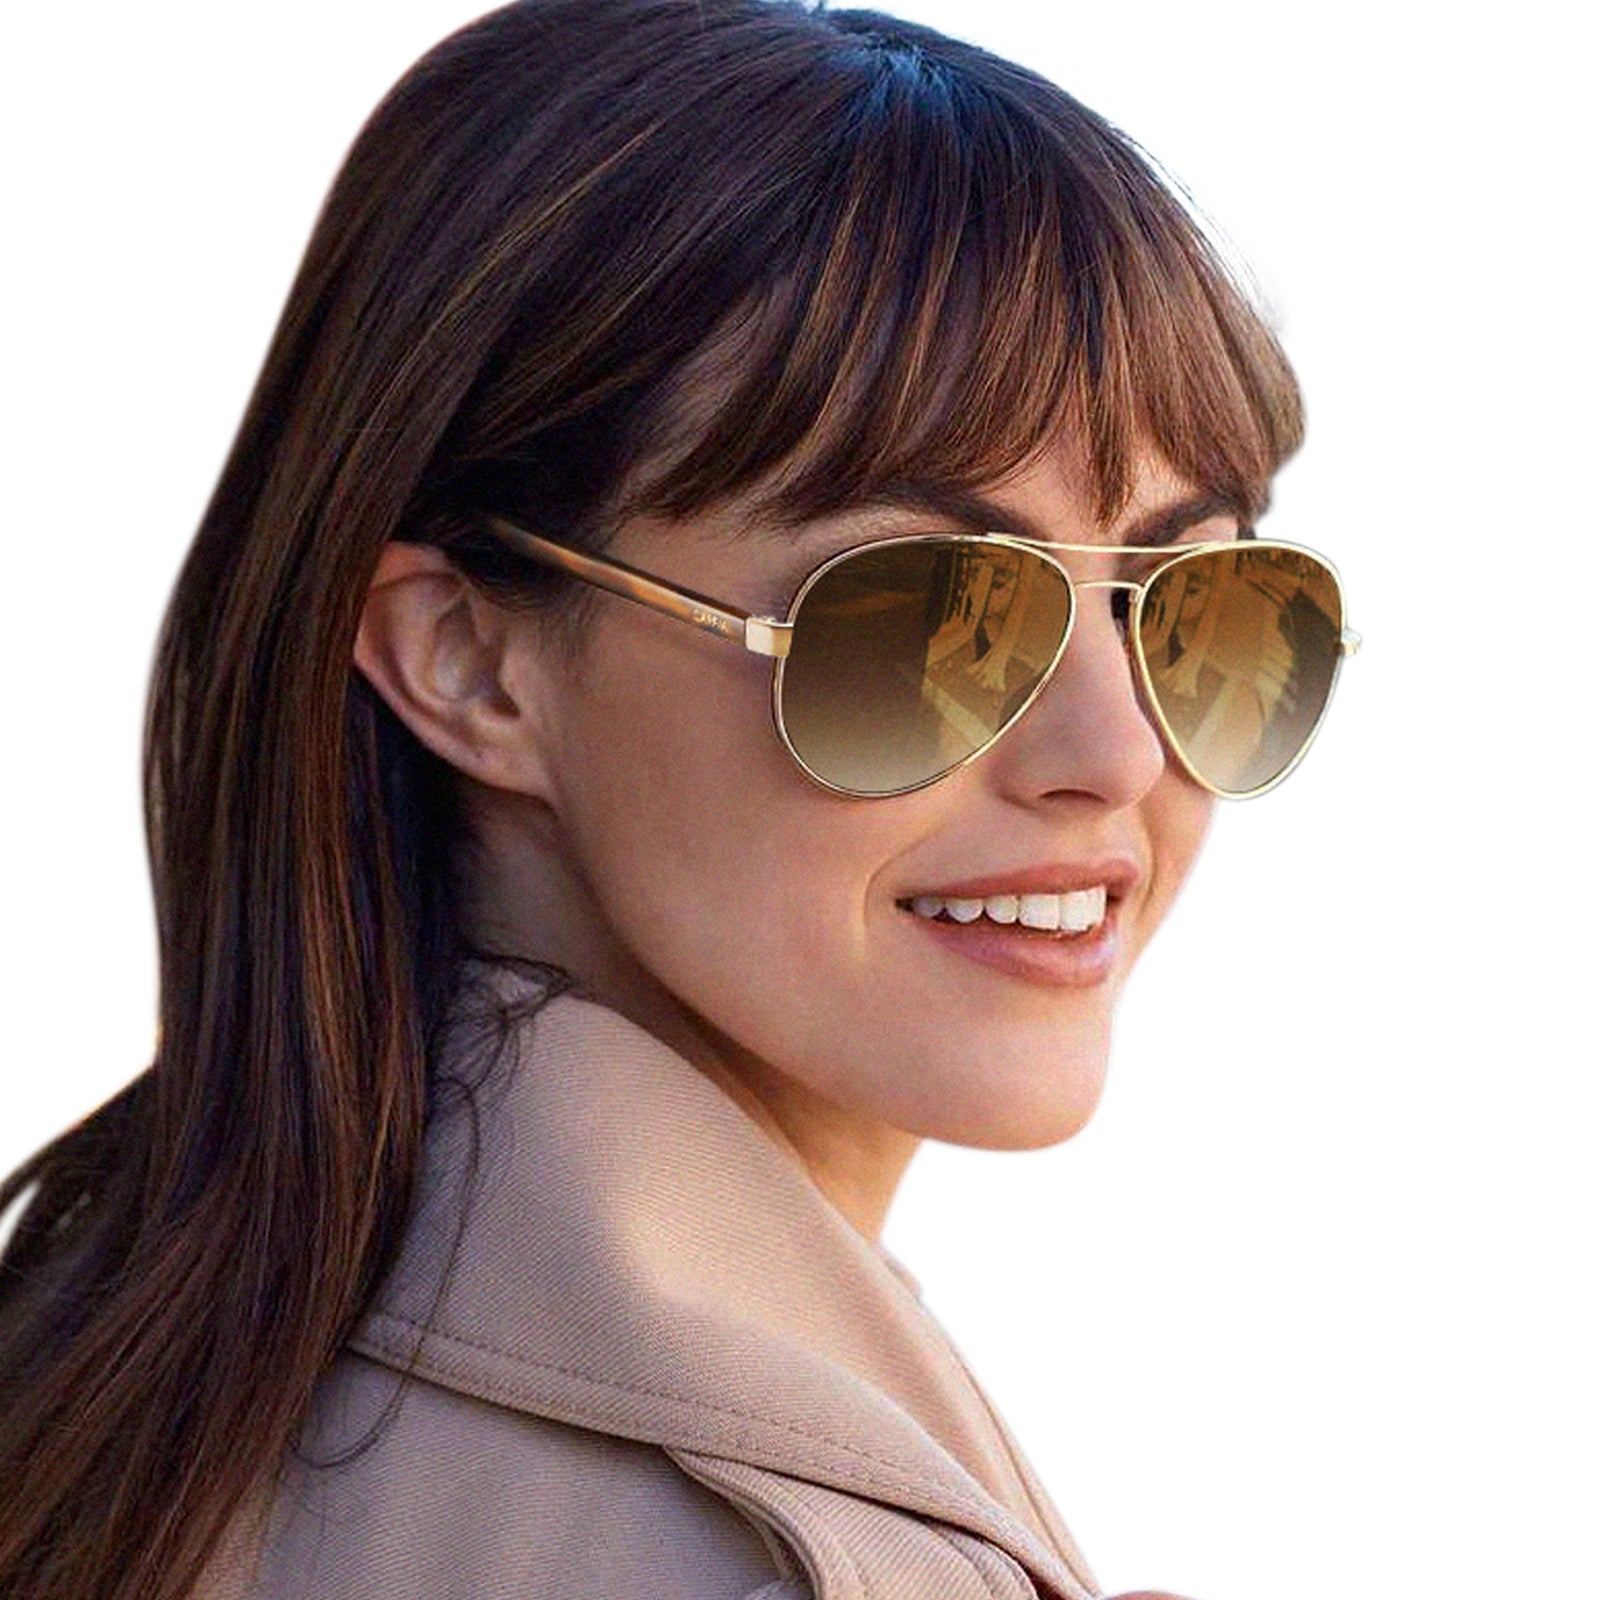 Where Can I Find Aviator Sunglasses at Better Price?